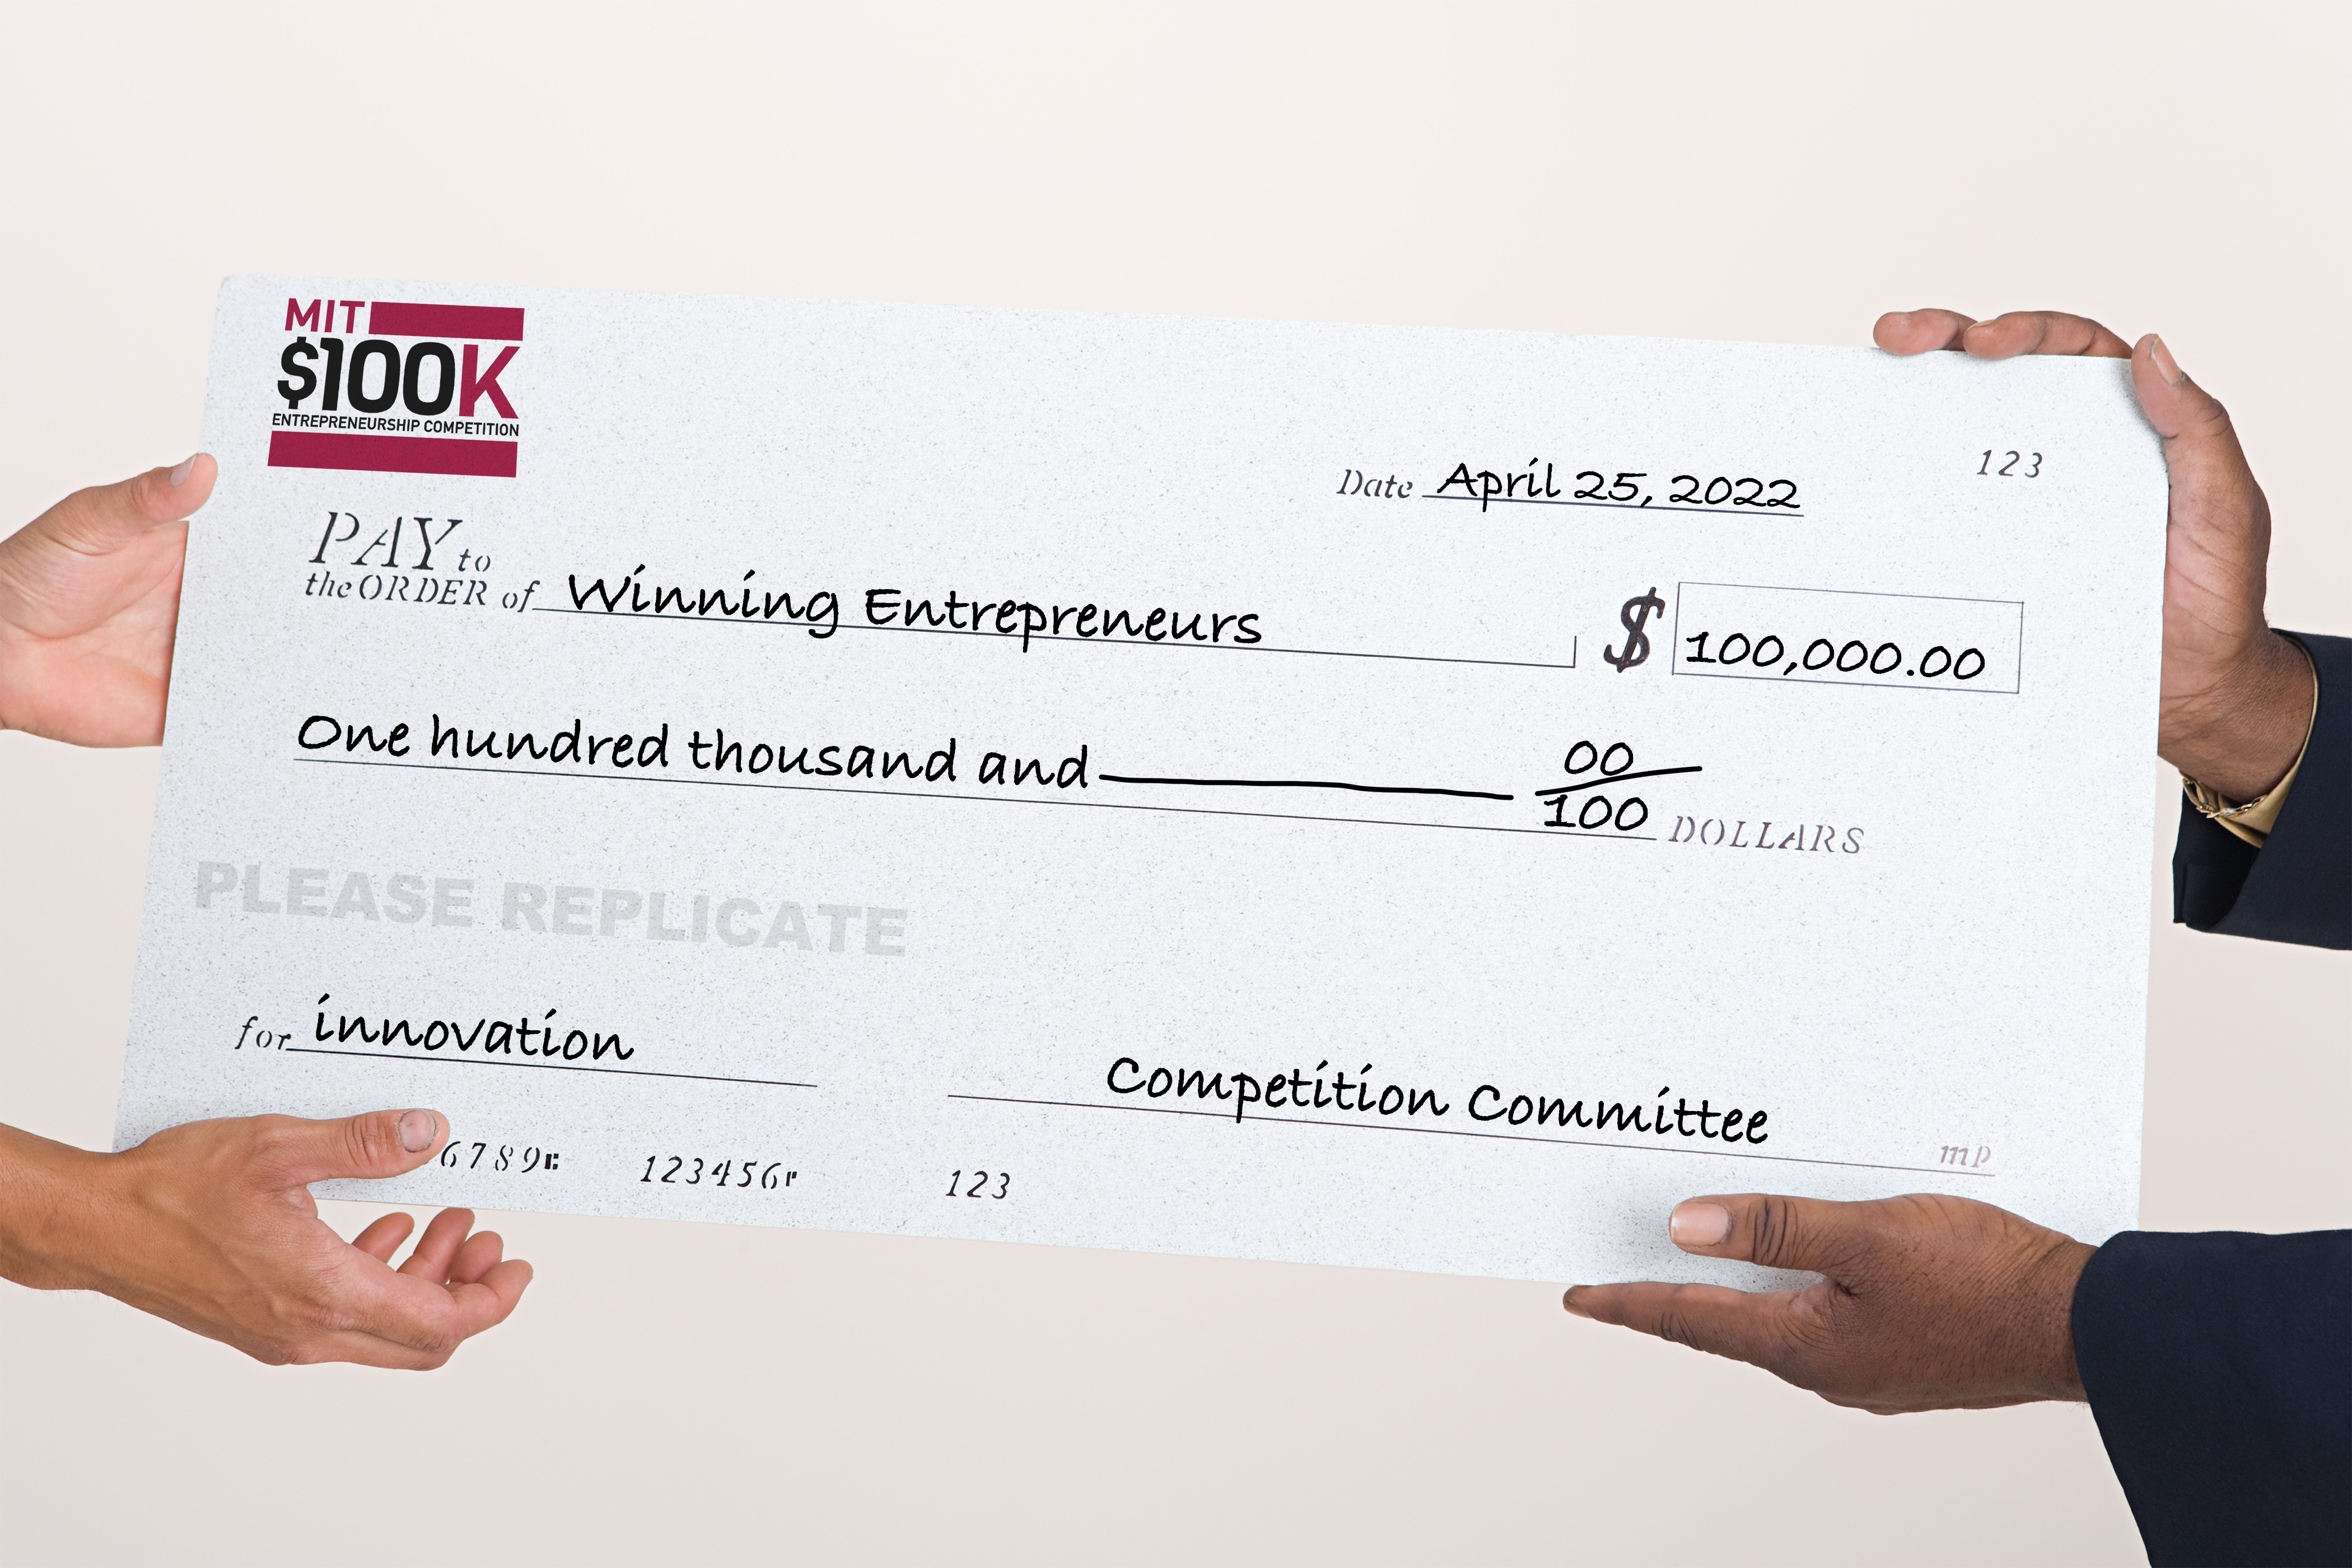 MIT's $100K Entrepreneurship Competition has been replicated around the world.